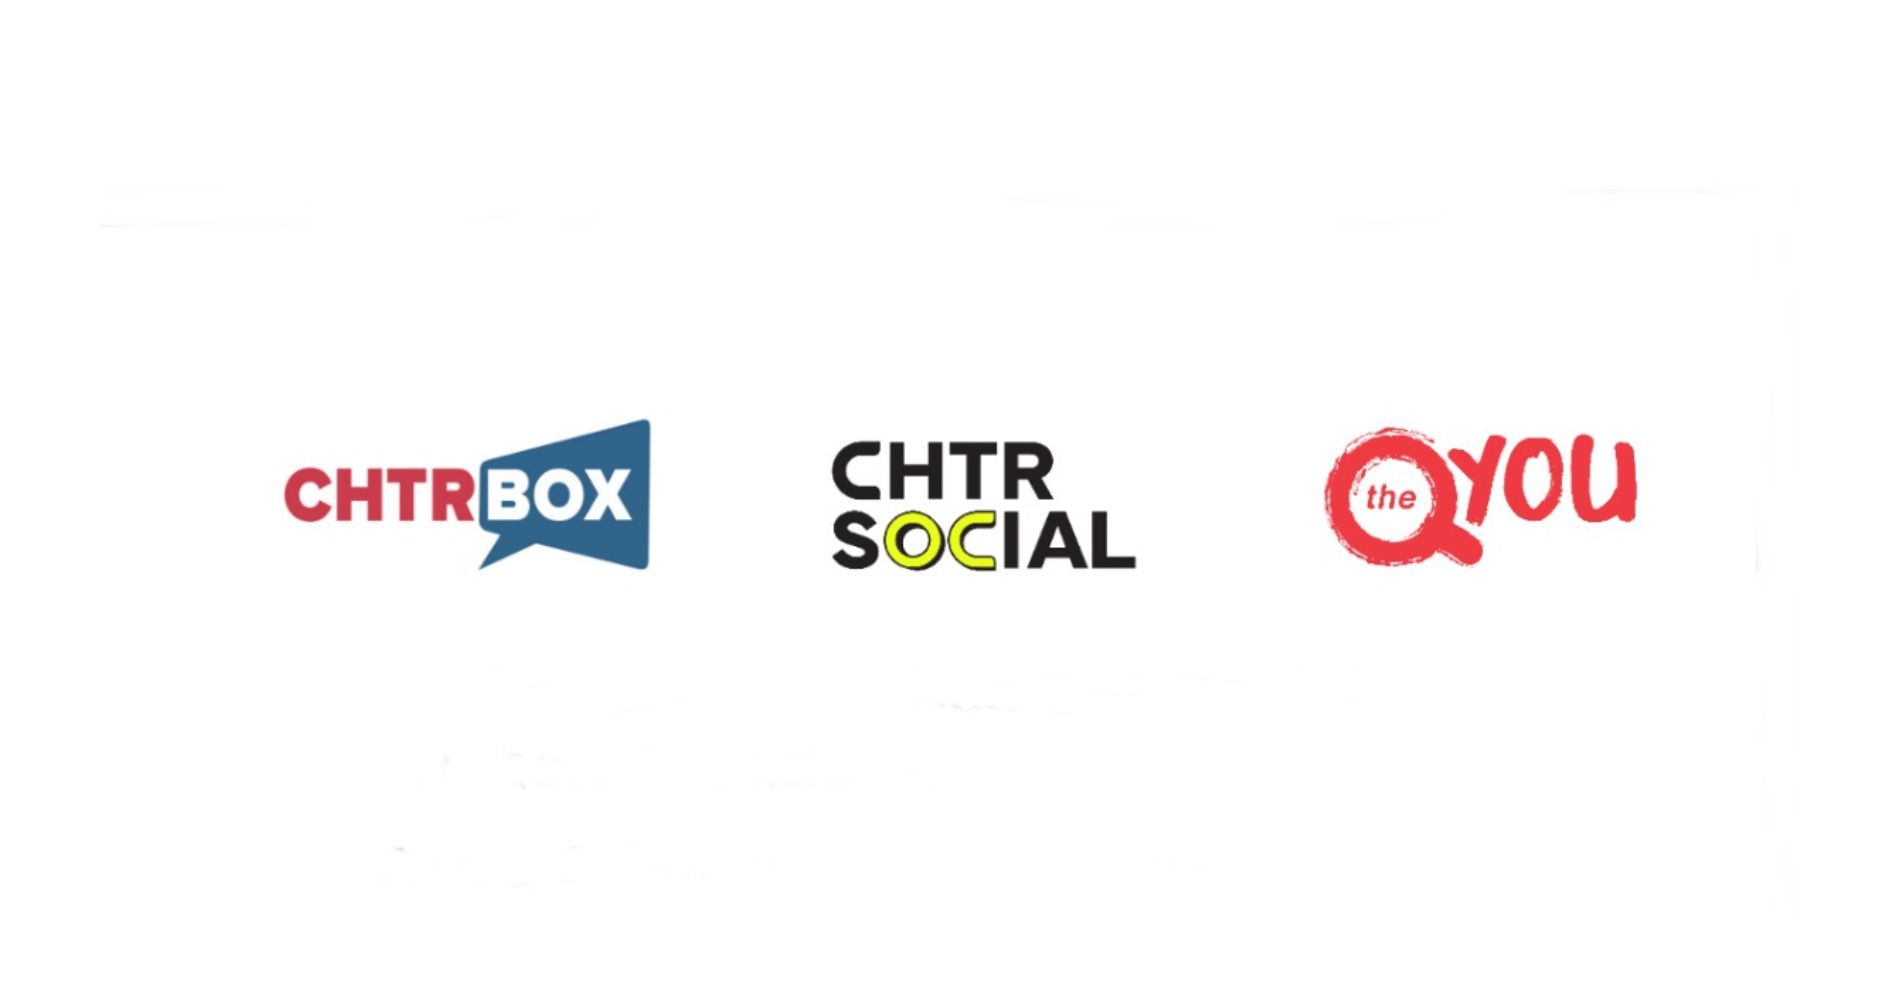 Chtrbox Launches ChtrSocial To Enable “Brands To Become Creators"